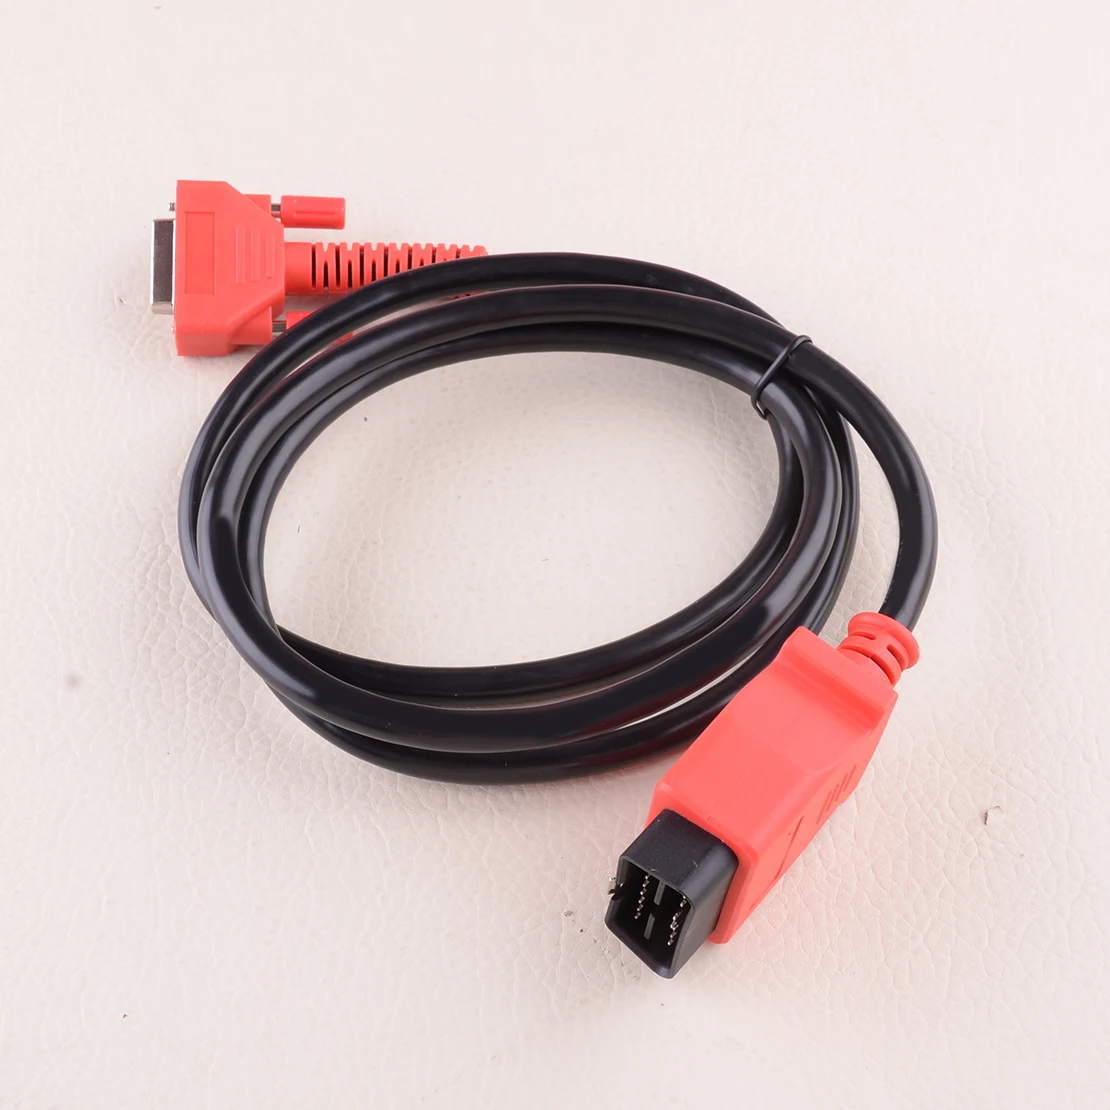 High Performance Car OBD2 OBDII Main Test Data Cable Cord Wire Fit For Autel MaxiCOM MK808 MX808 Diagnostic Scanner